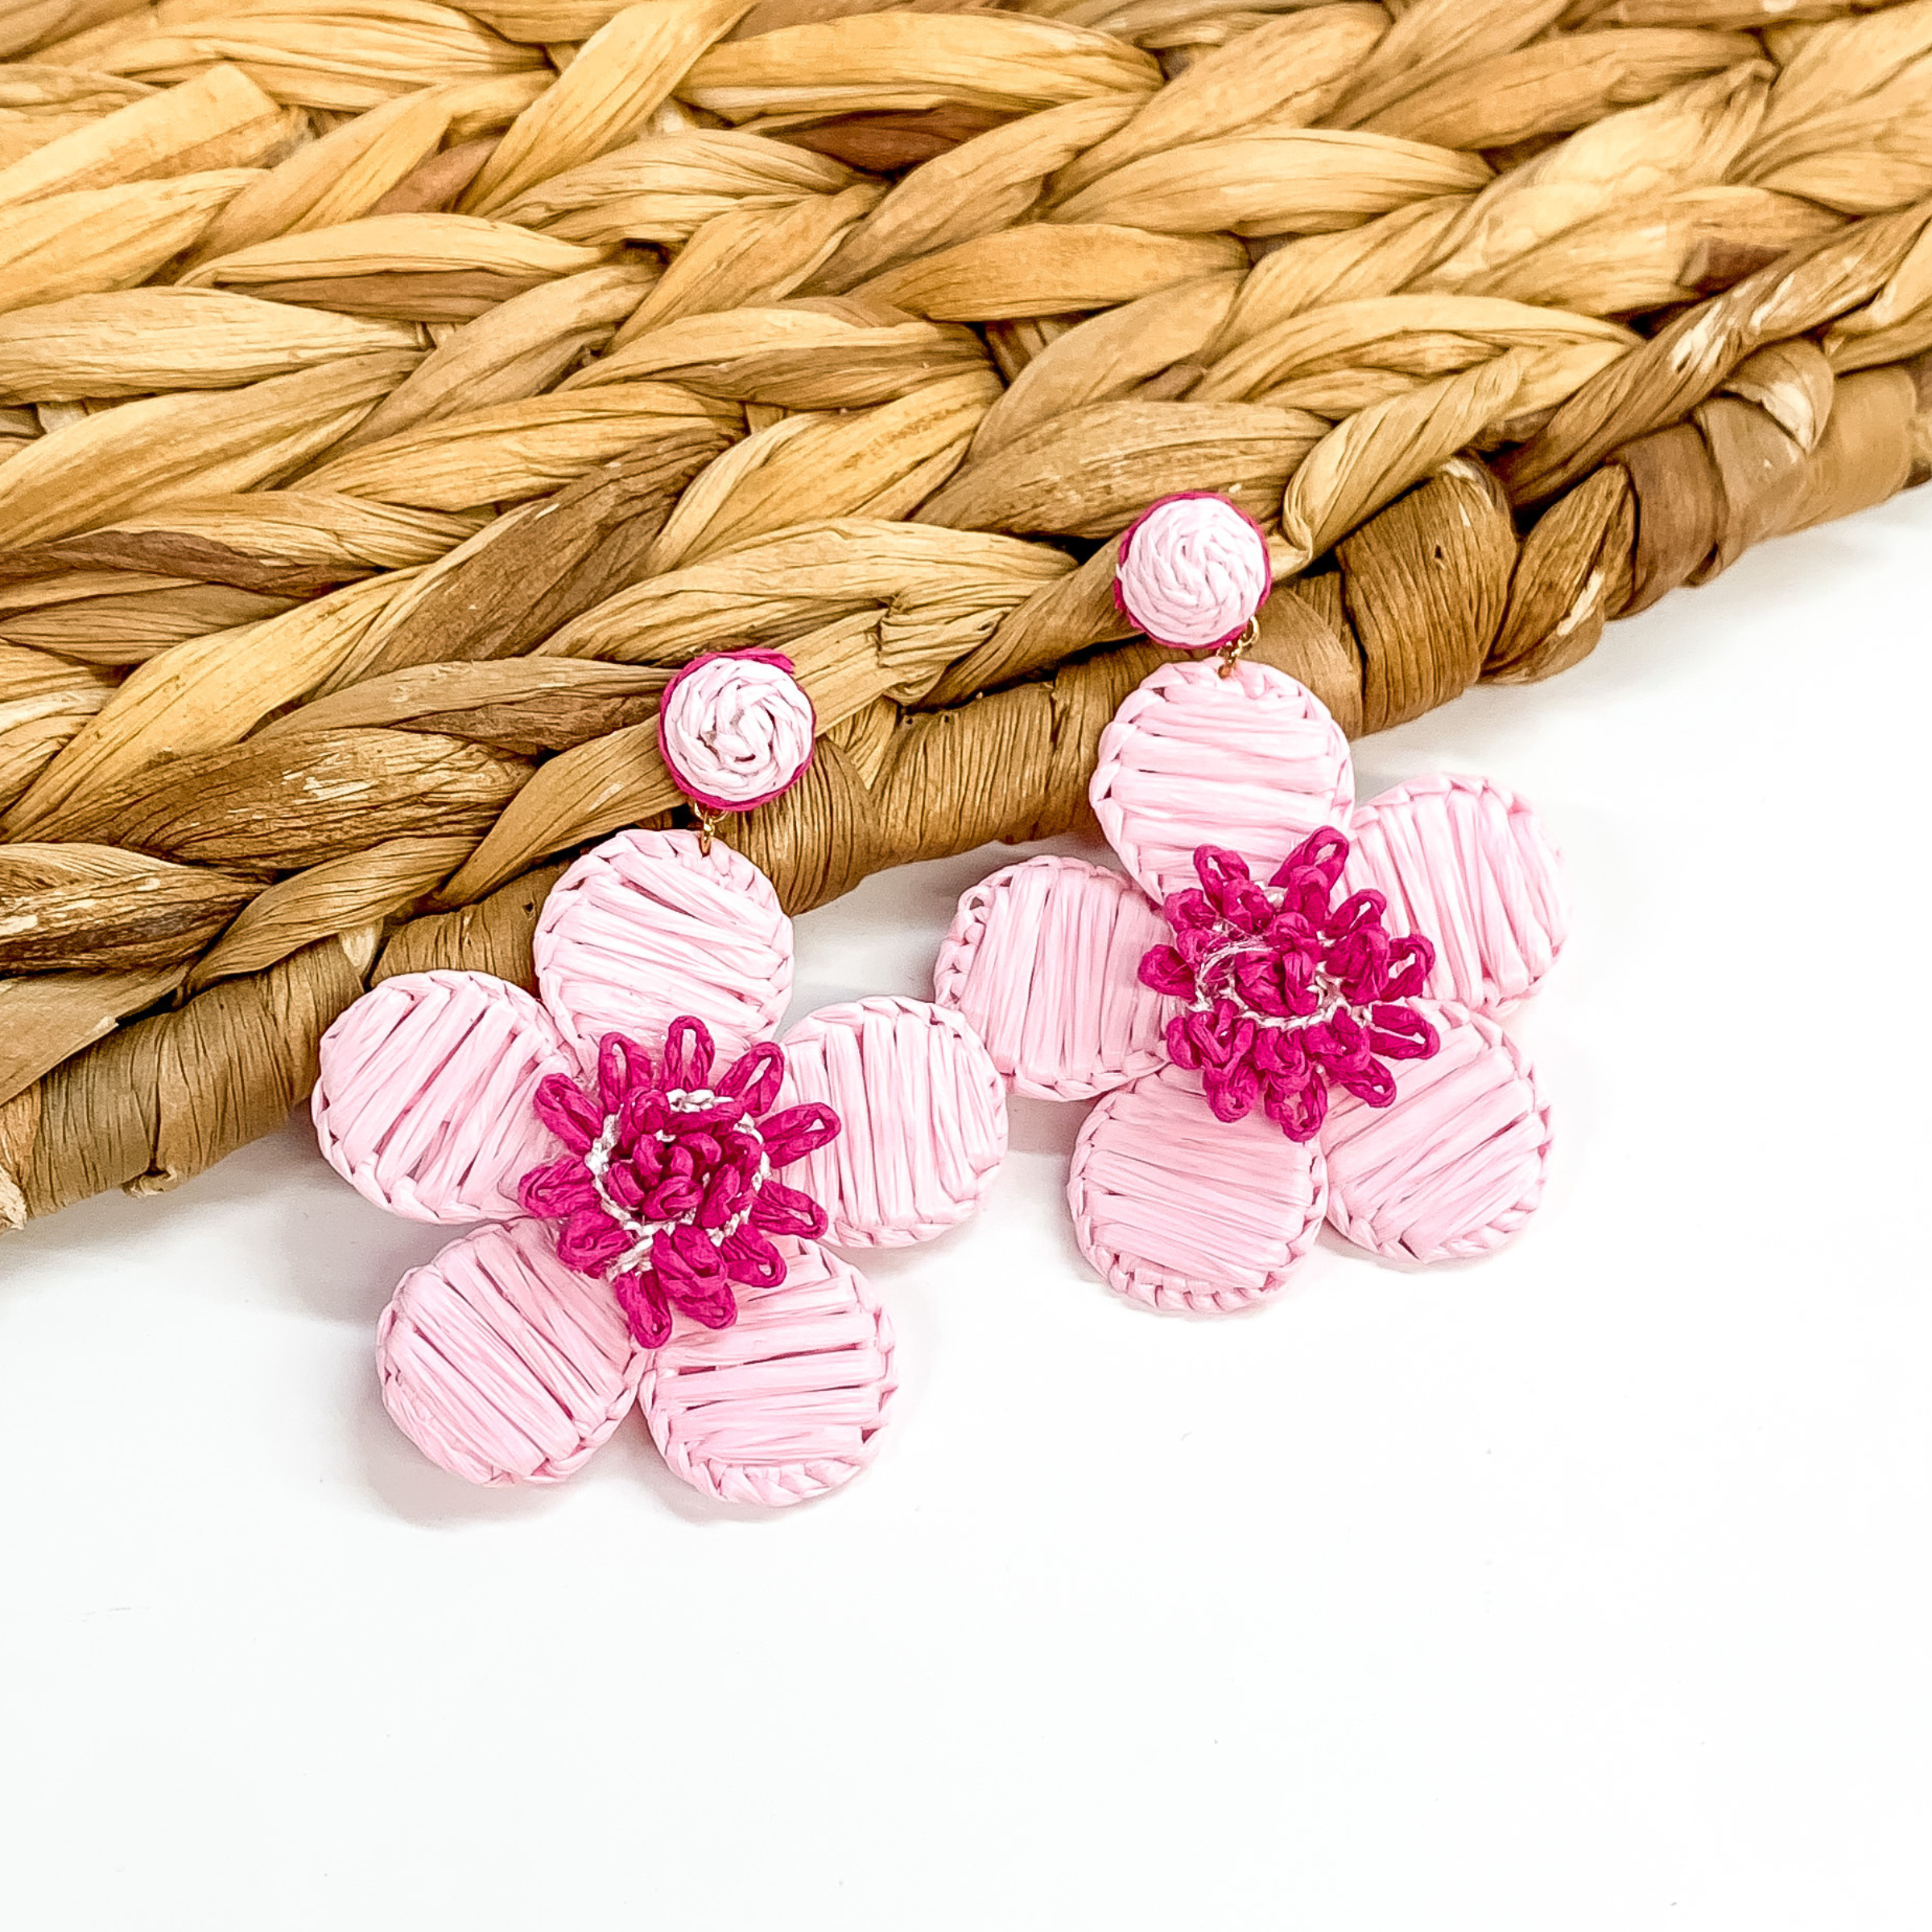 Baby pink affia wrapped circle studs with hanging flower pendant wrapped in baby pink  raffia and fuchsia colored middle. These earrings are pictured partially laying on a basket weave material on a white background. 